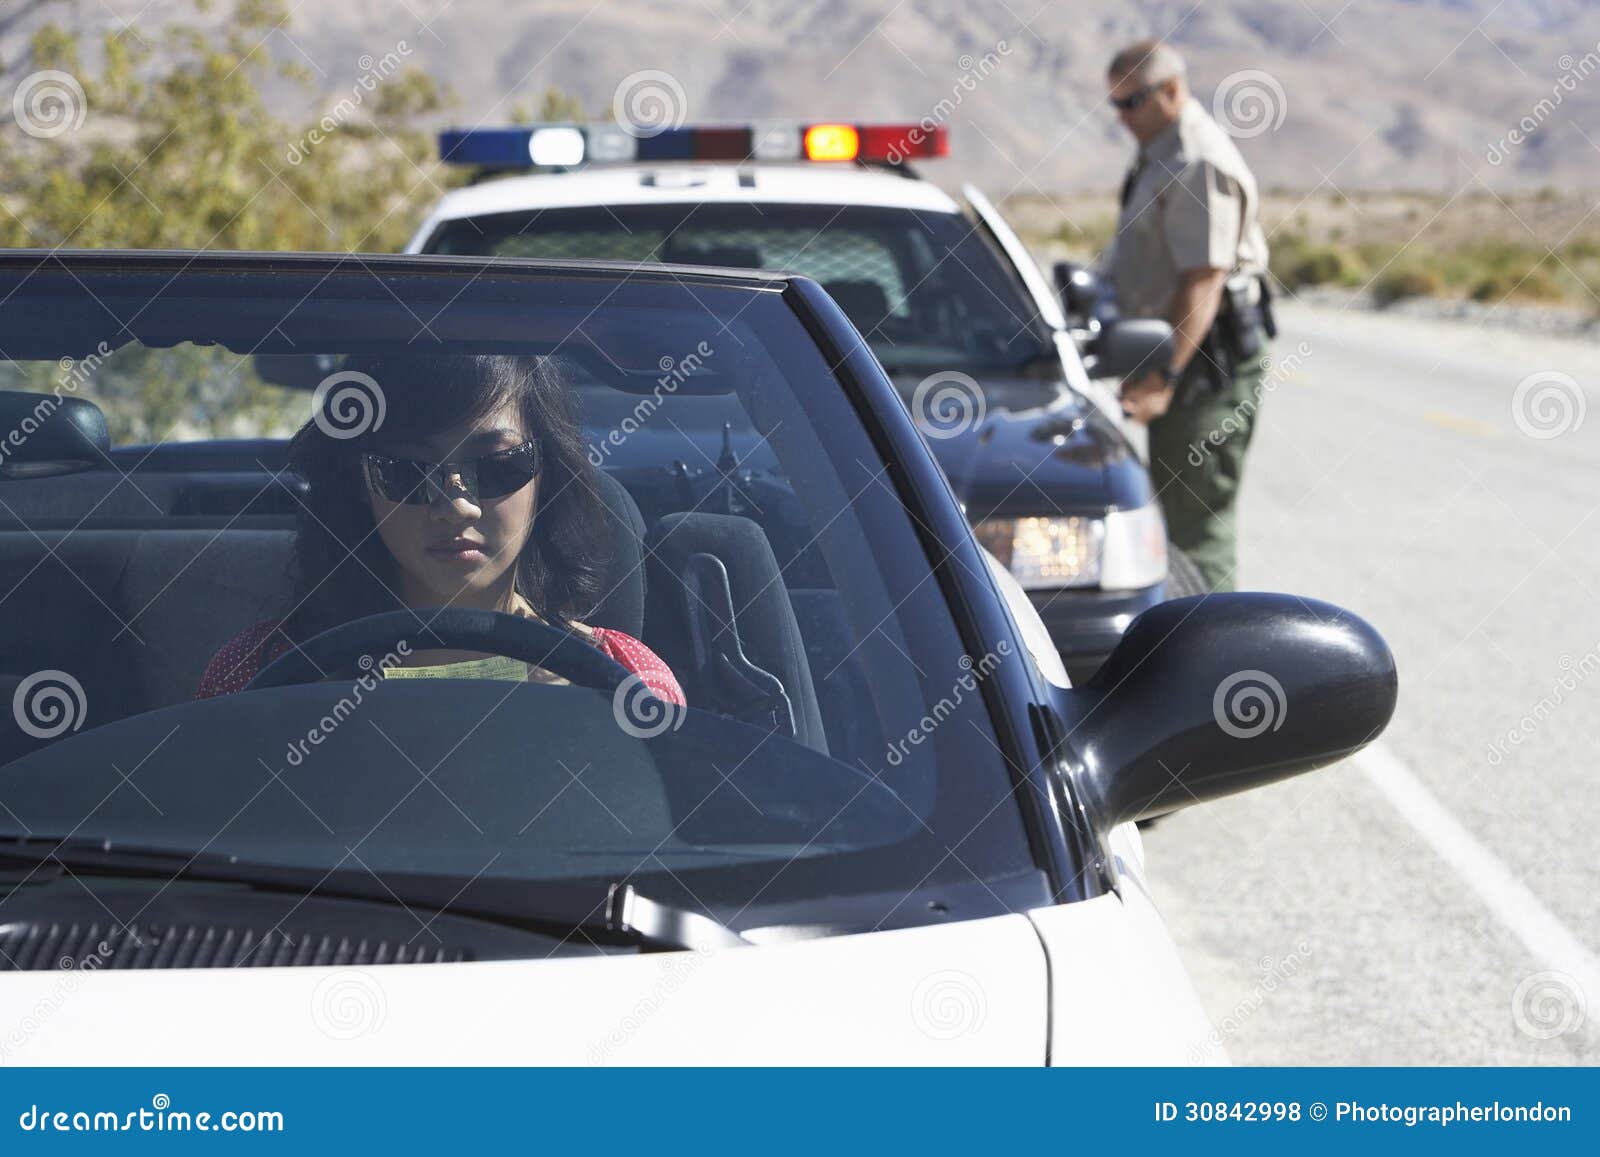 woman in car being pulled over by police officer